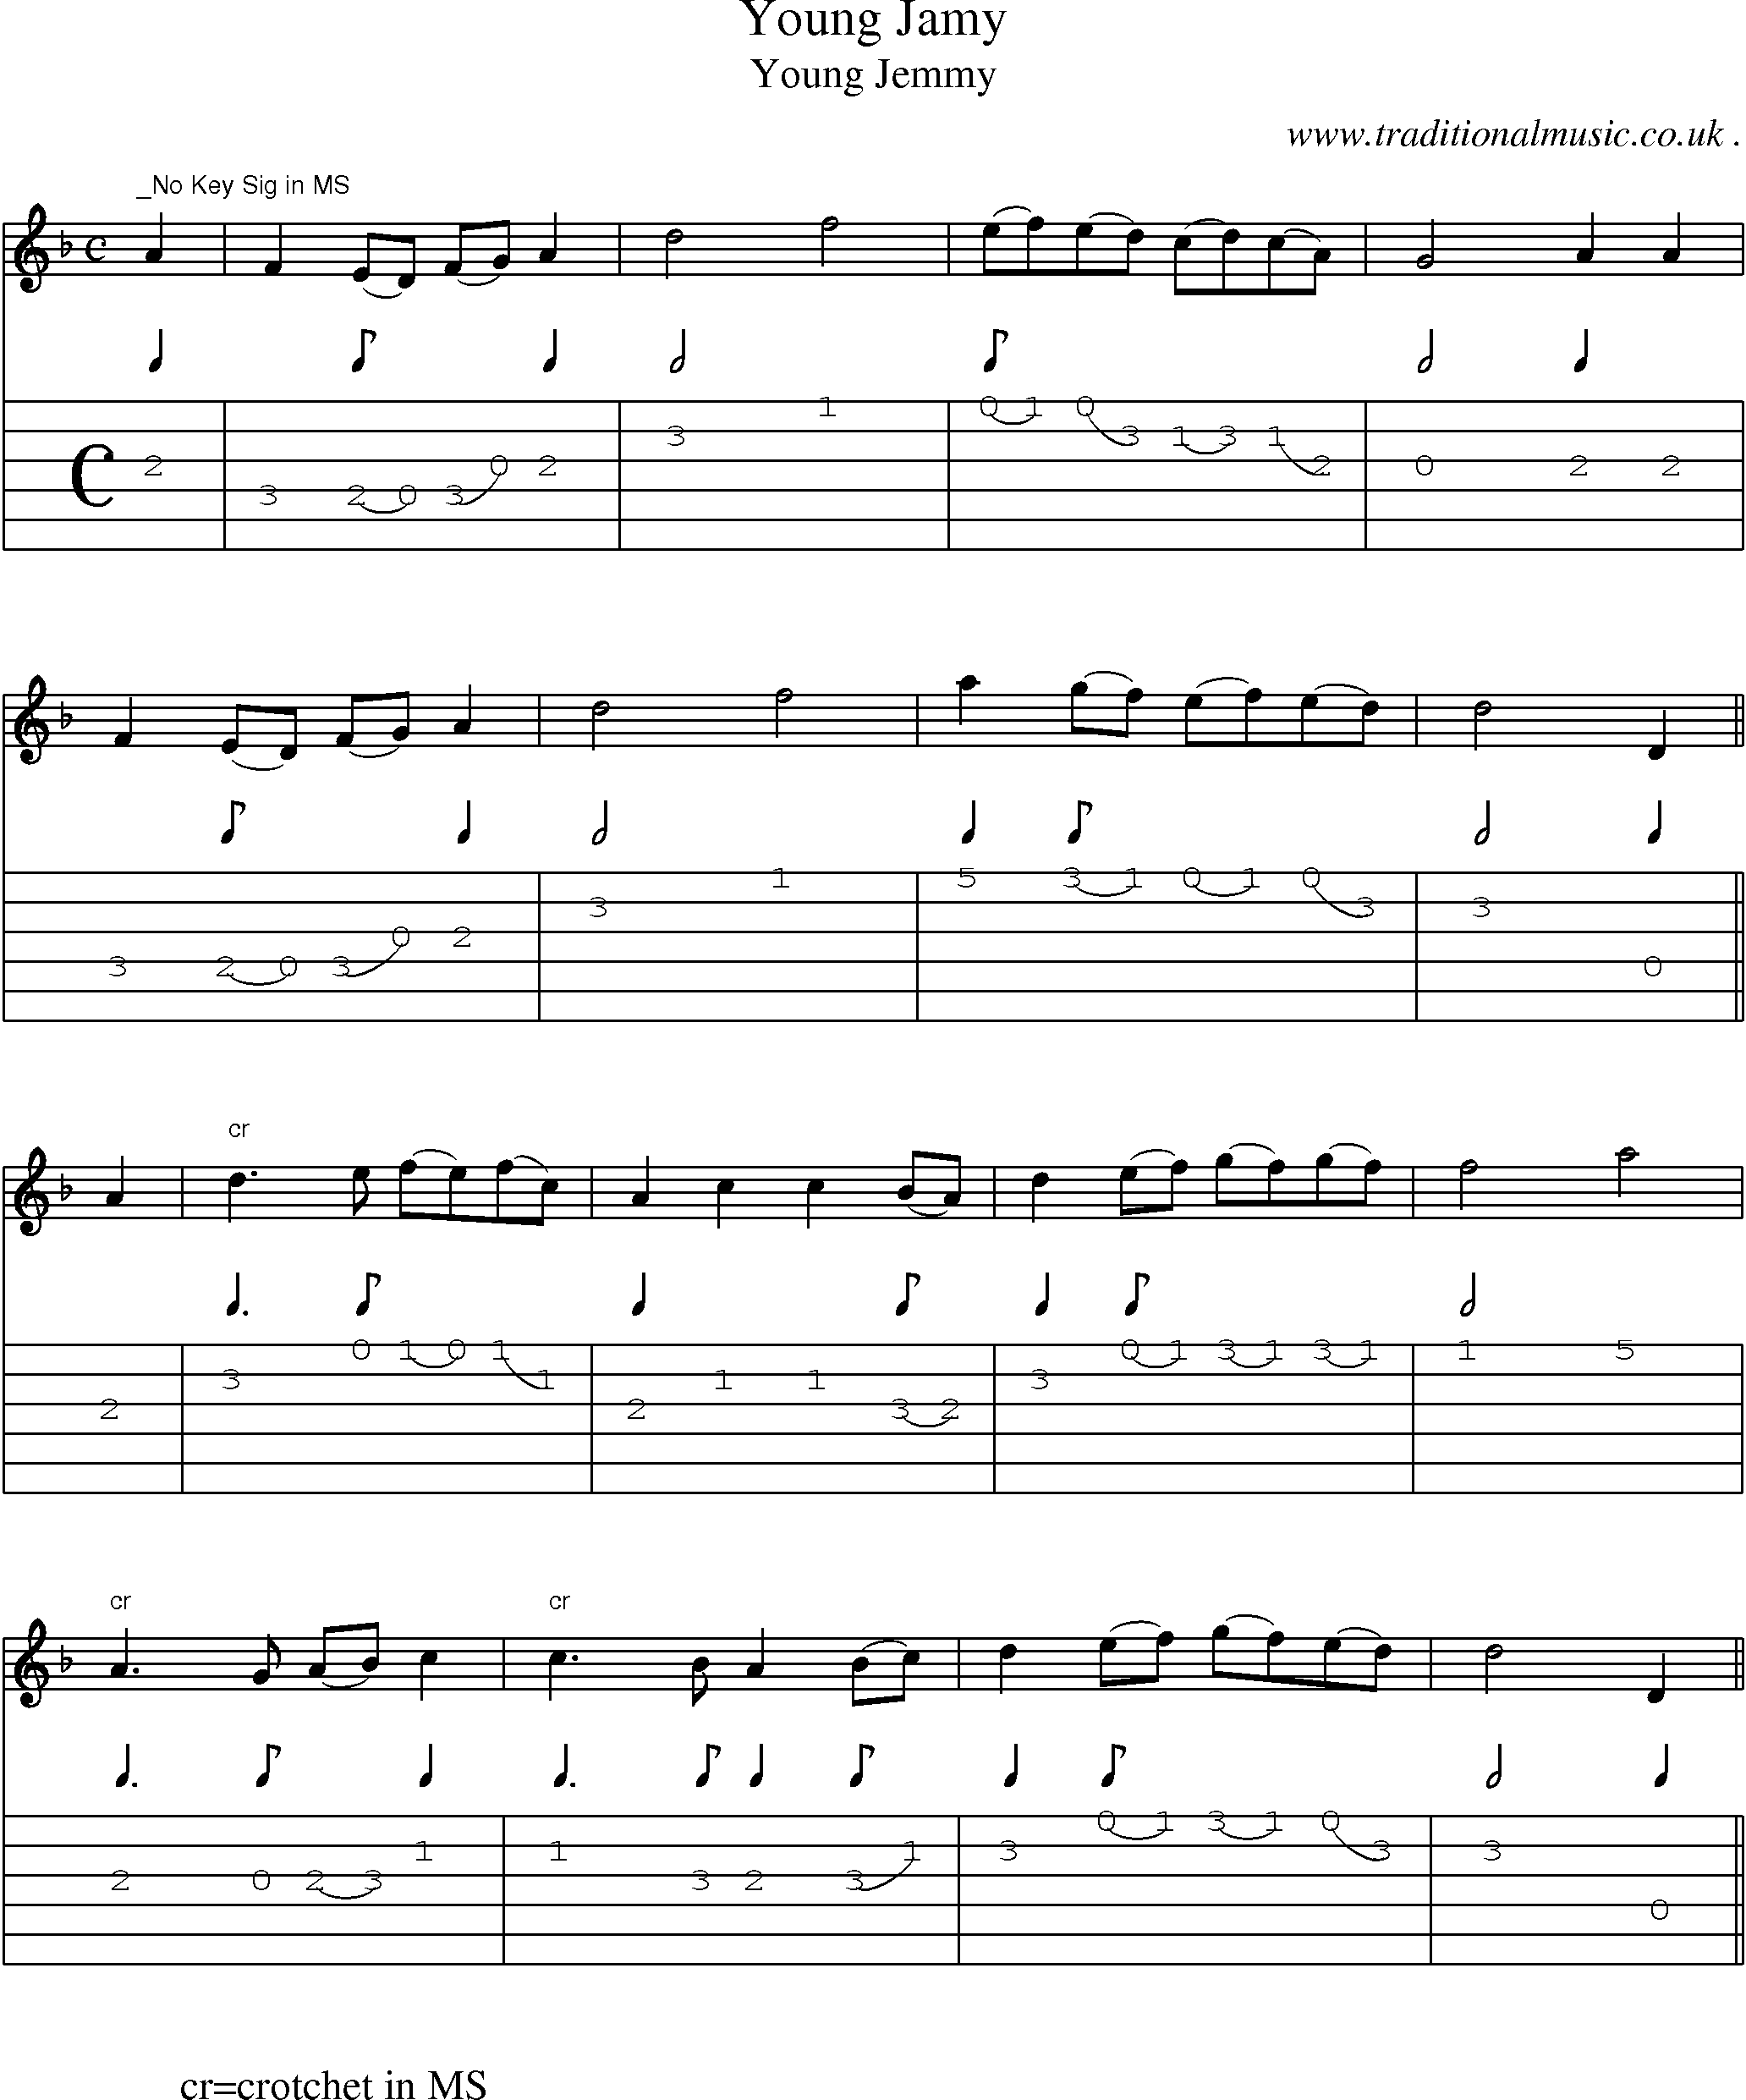 Sheet-Music and Guitar Tabs for Young Jamy